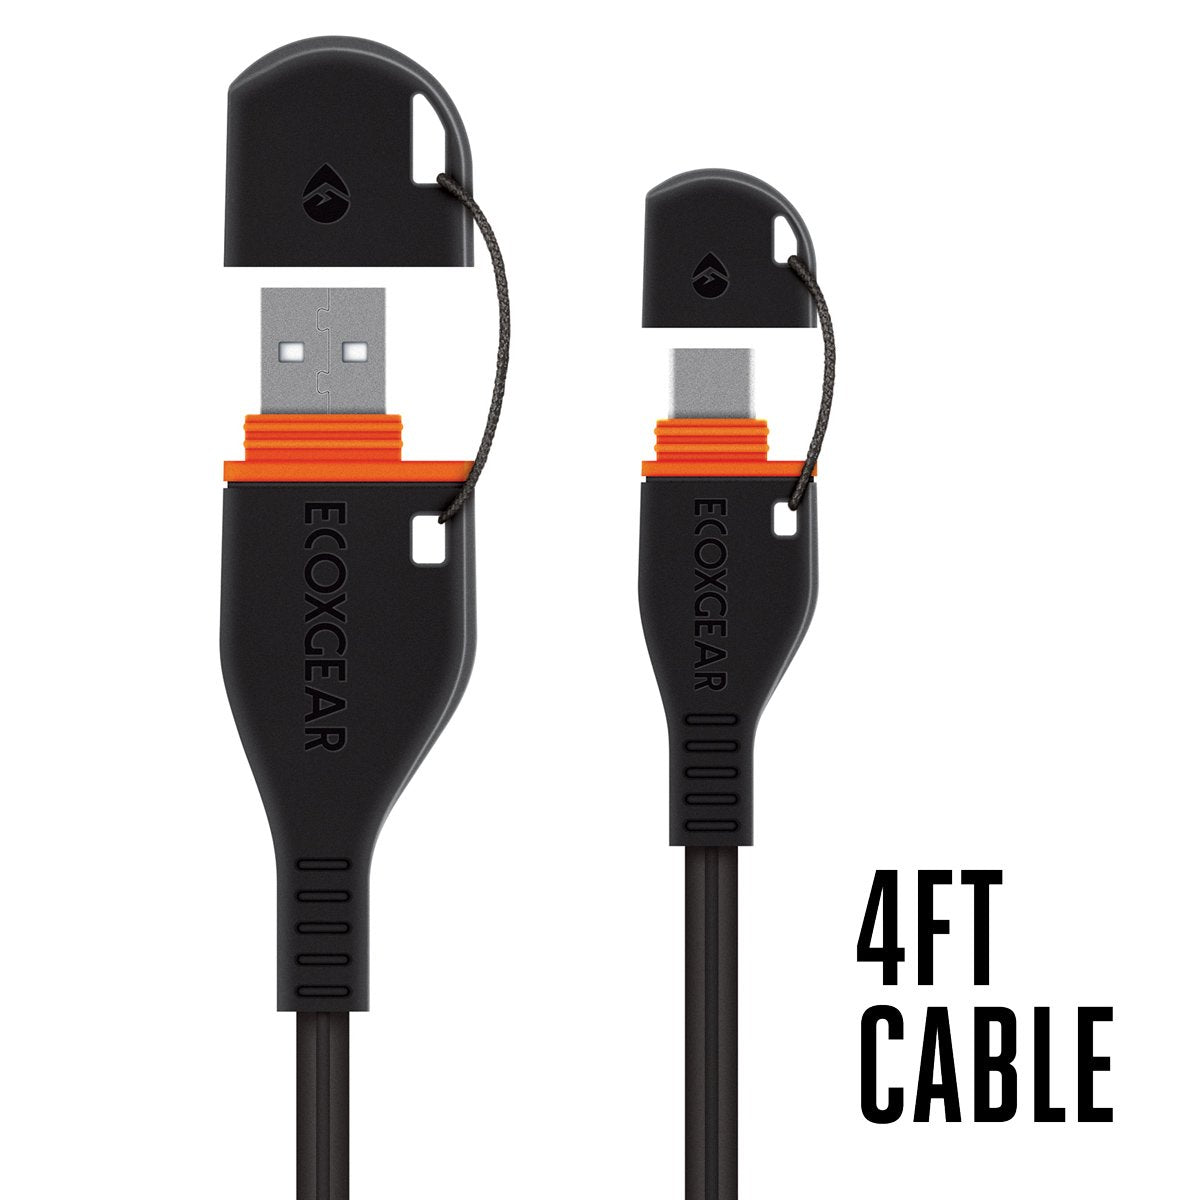 4ft Waterproof USB Cable